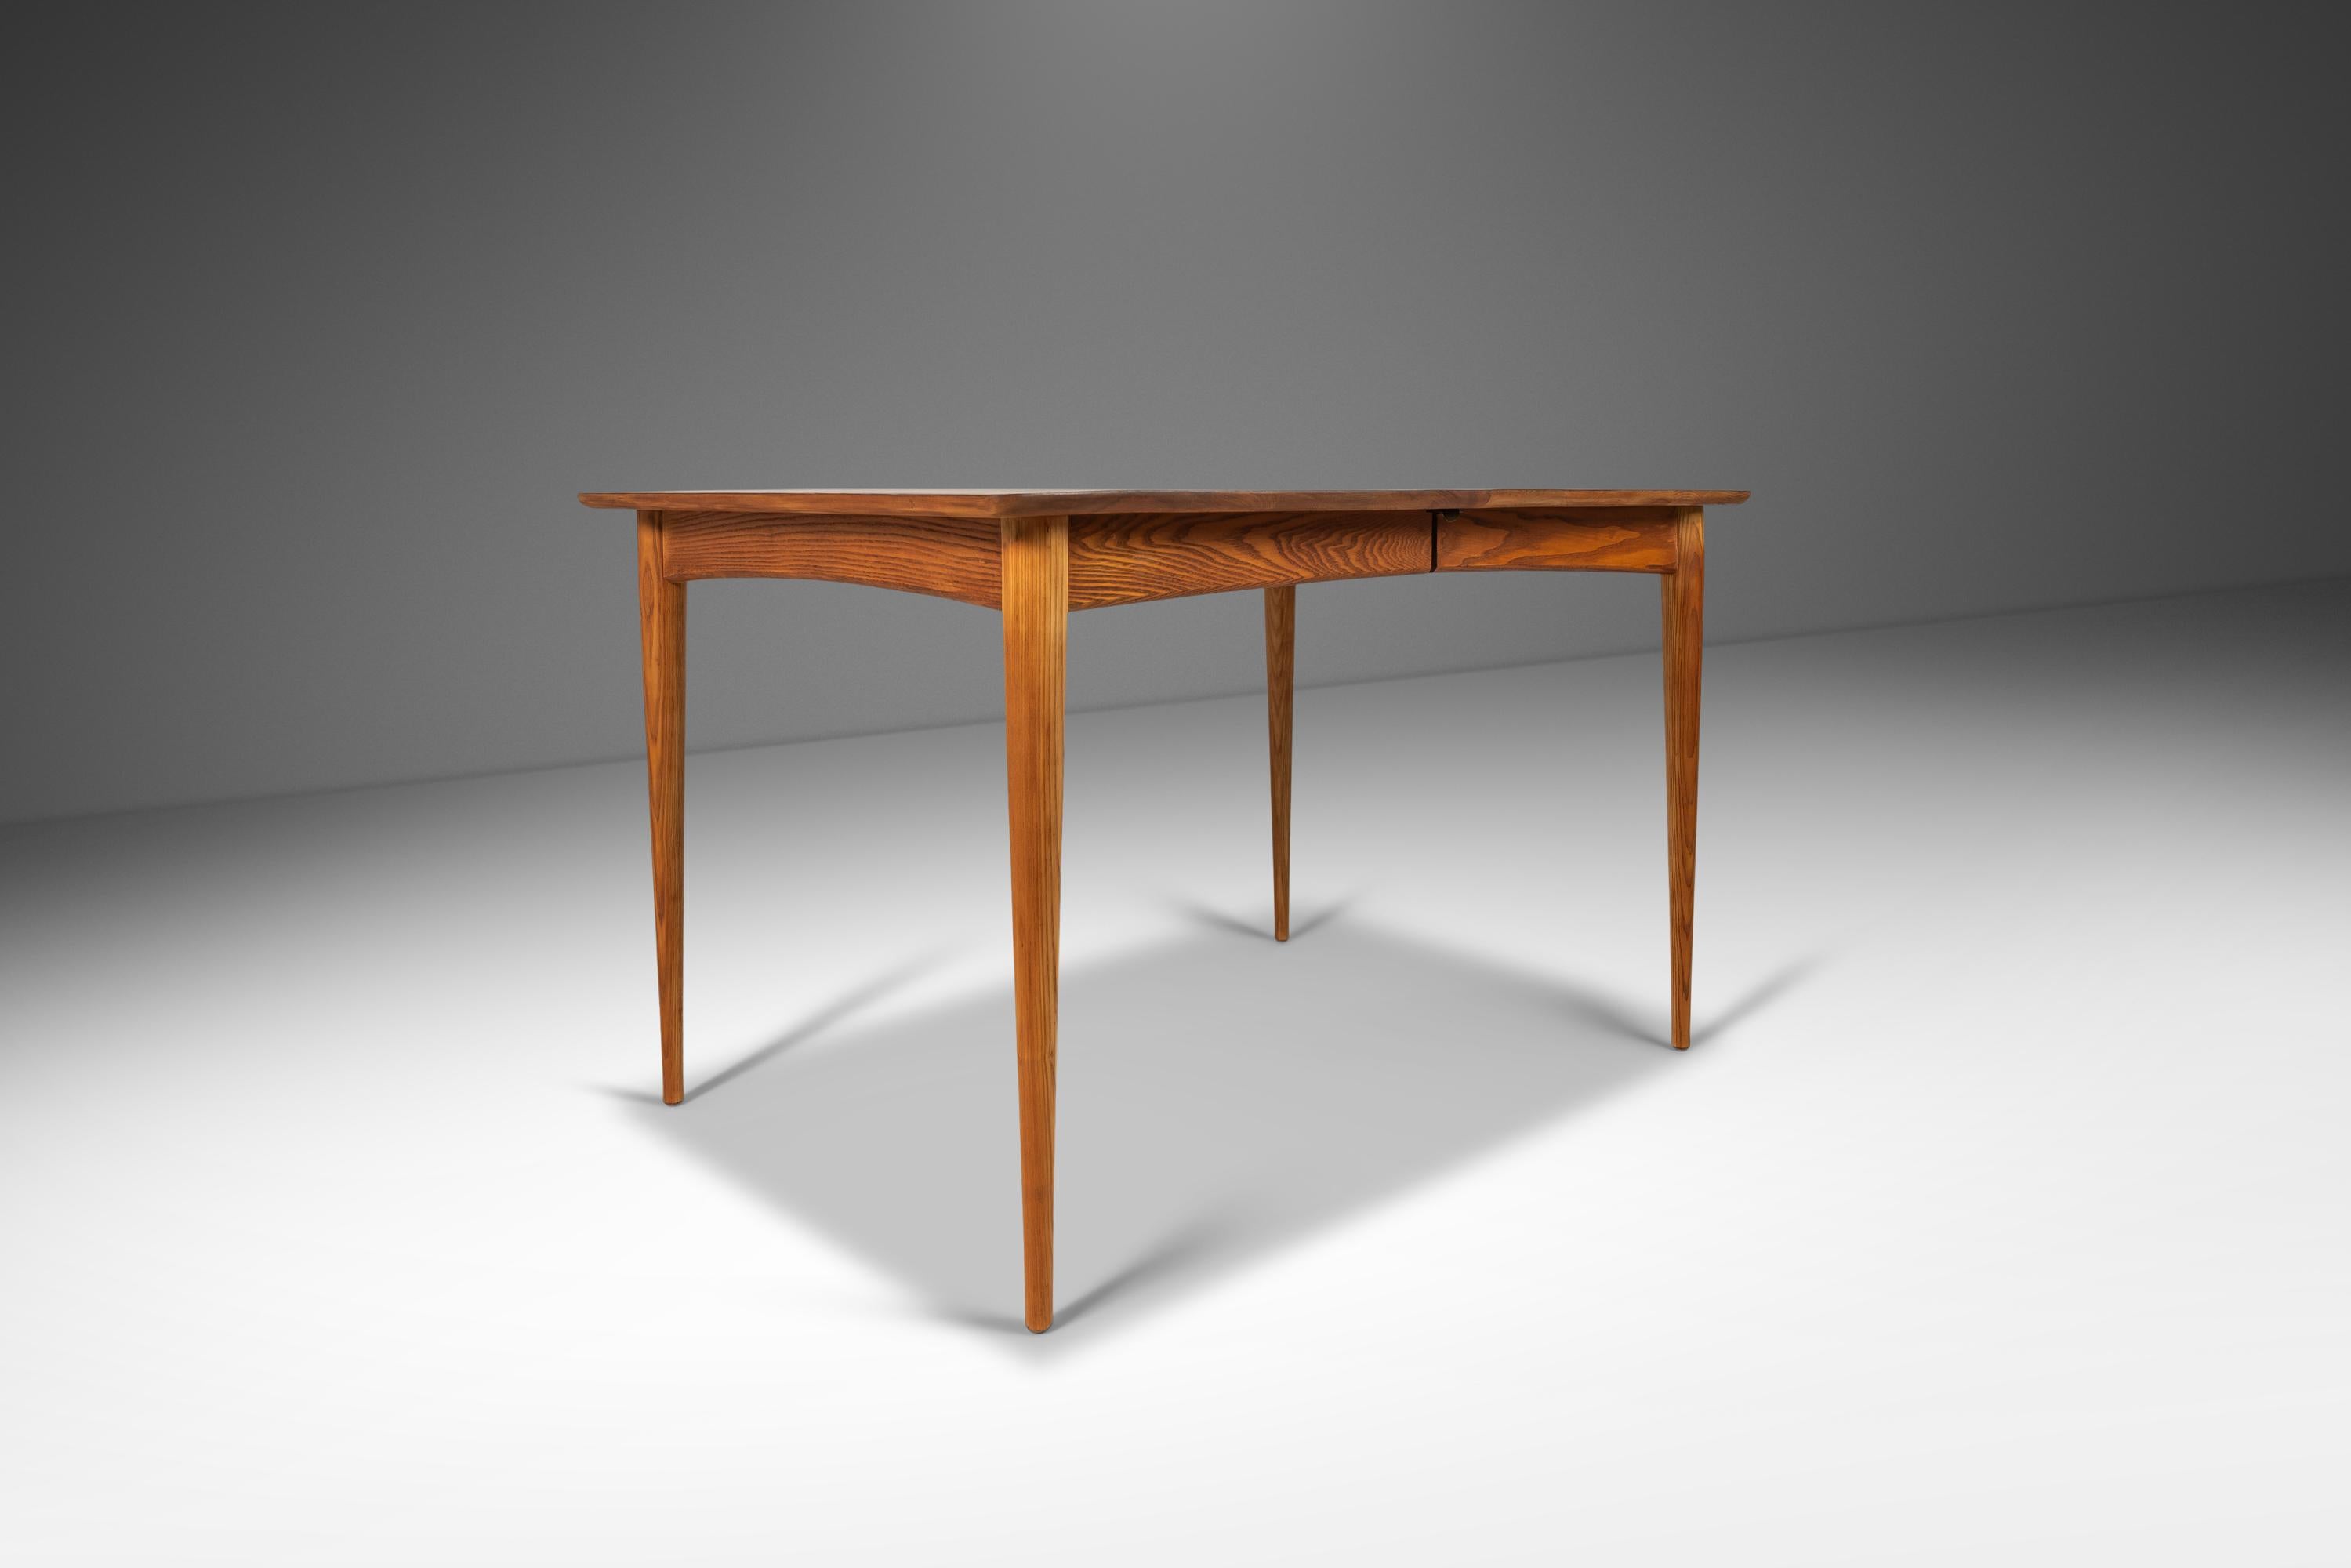 This splendid little dining table is a prime example of American Mid-Century Modern design. Constructed entirely from solid oak with gorgeous, profound woodgrains this exceptional table is altogether warm and charming yet modern and Minimalist in